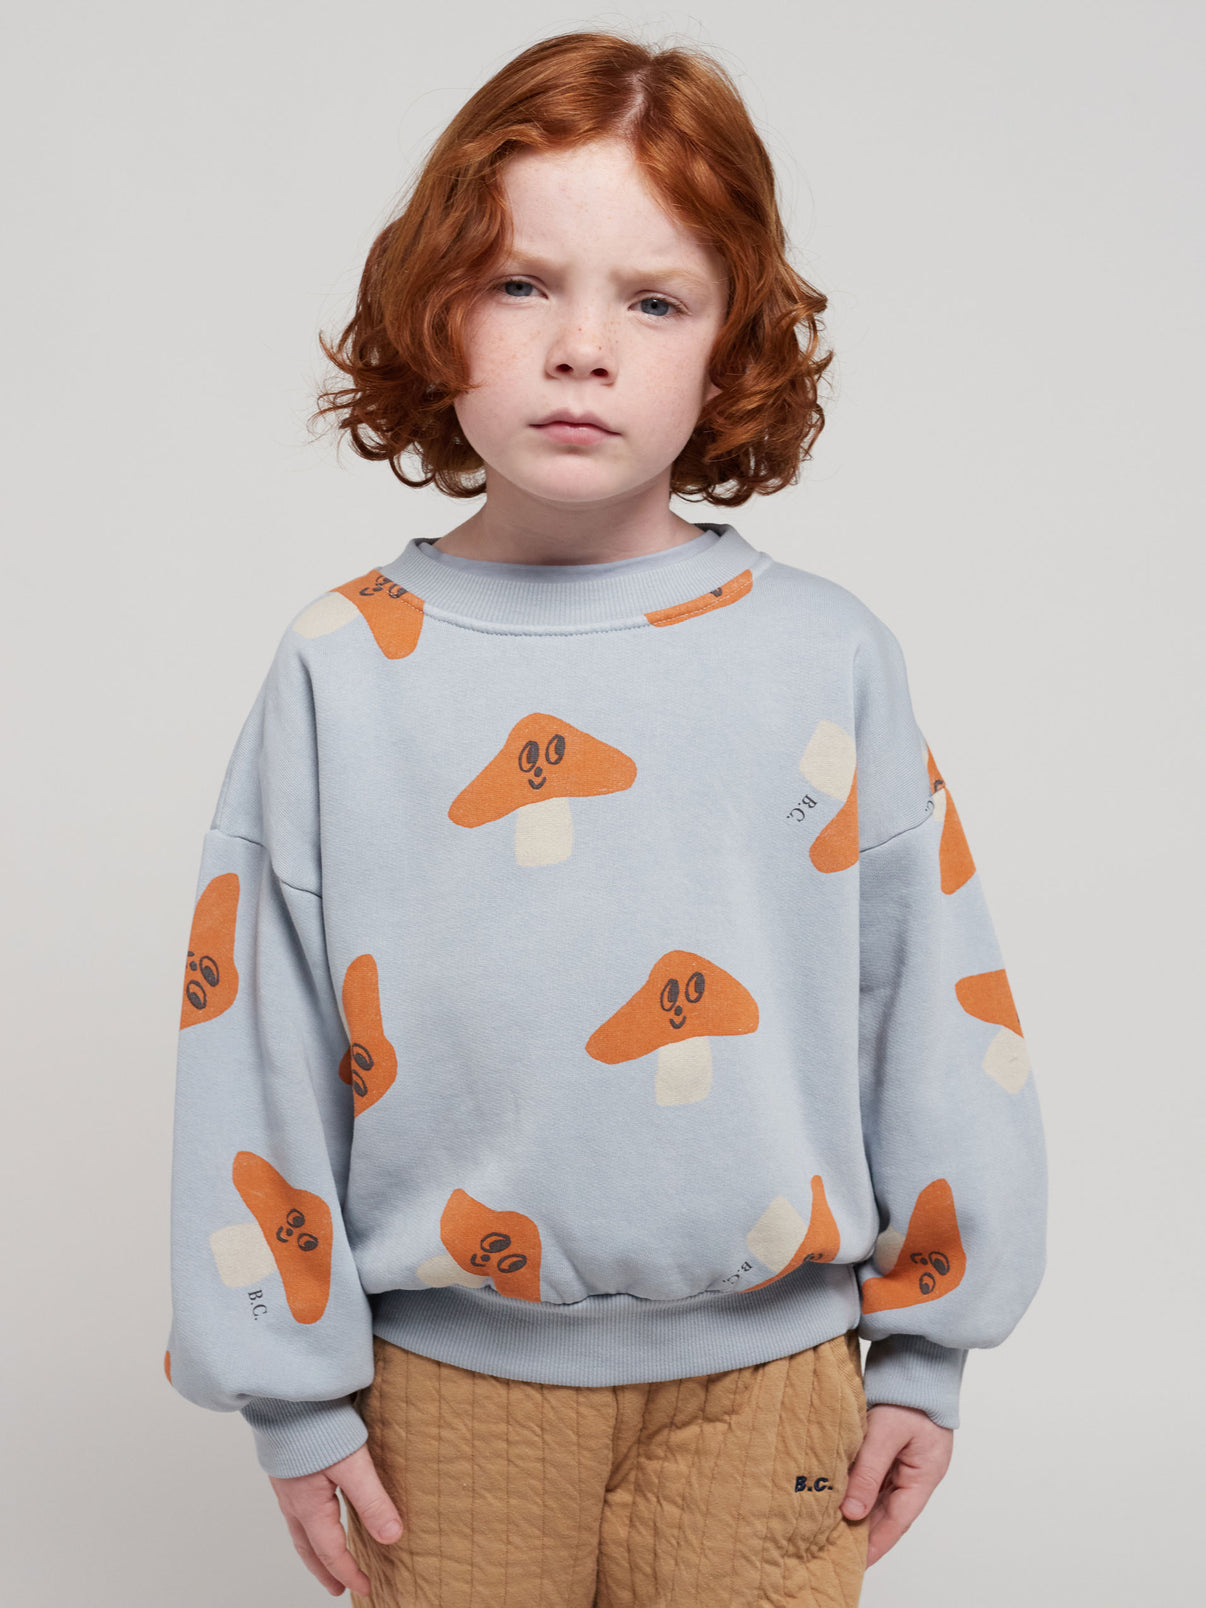 95% organic cotton 5% elastane light blue sweatshirt with playful mushroom print. Designed with long sleeves & dropped shoulder. It has a loose fit.  Made ethically and sustainably in Portugal for Bobo Choses. mr mushroom sweatshirt